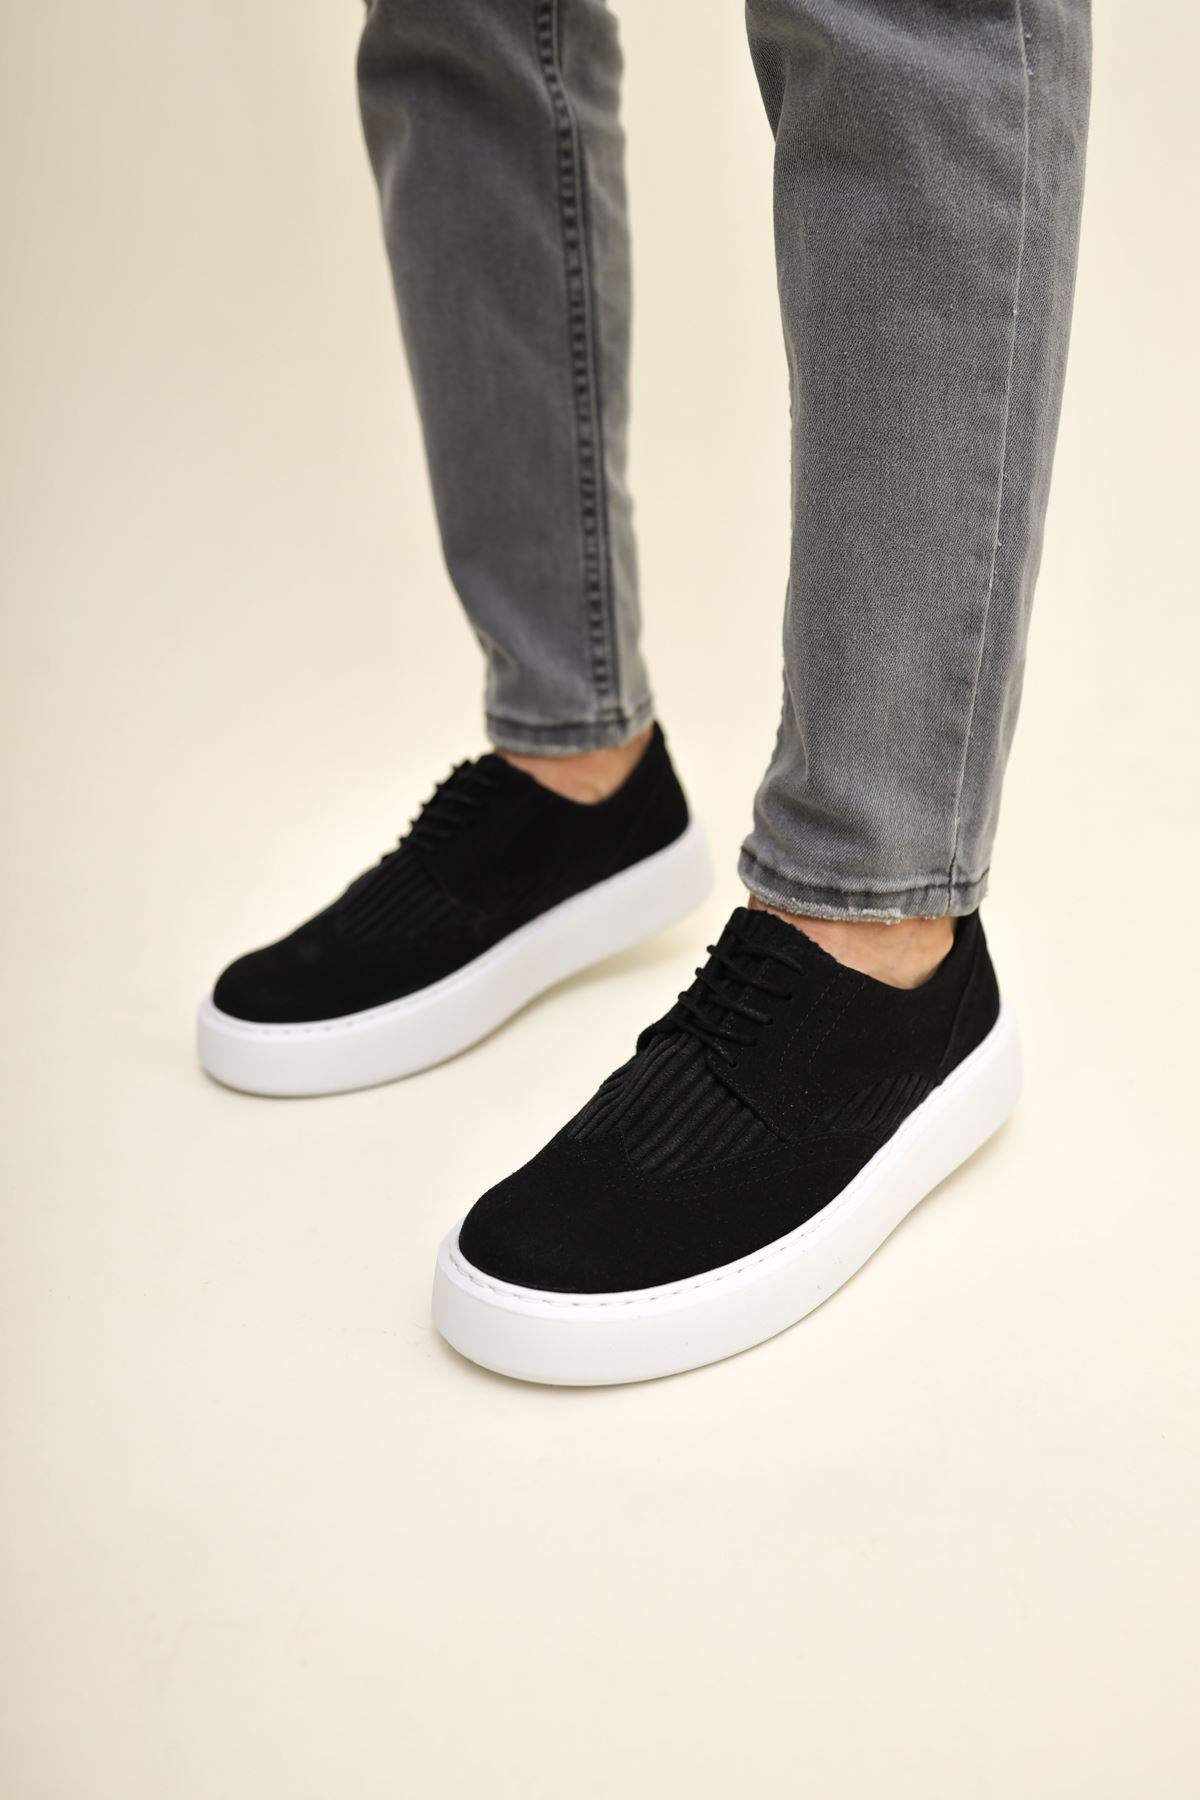 CH 149 Men's Sneakers Shoes BLACK Suede - STREETMODE ™